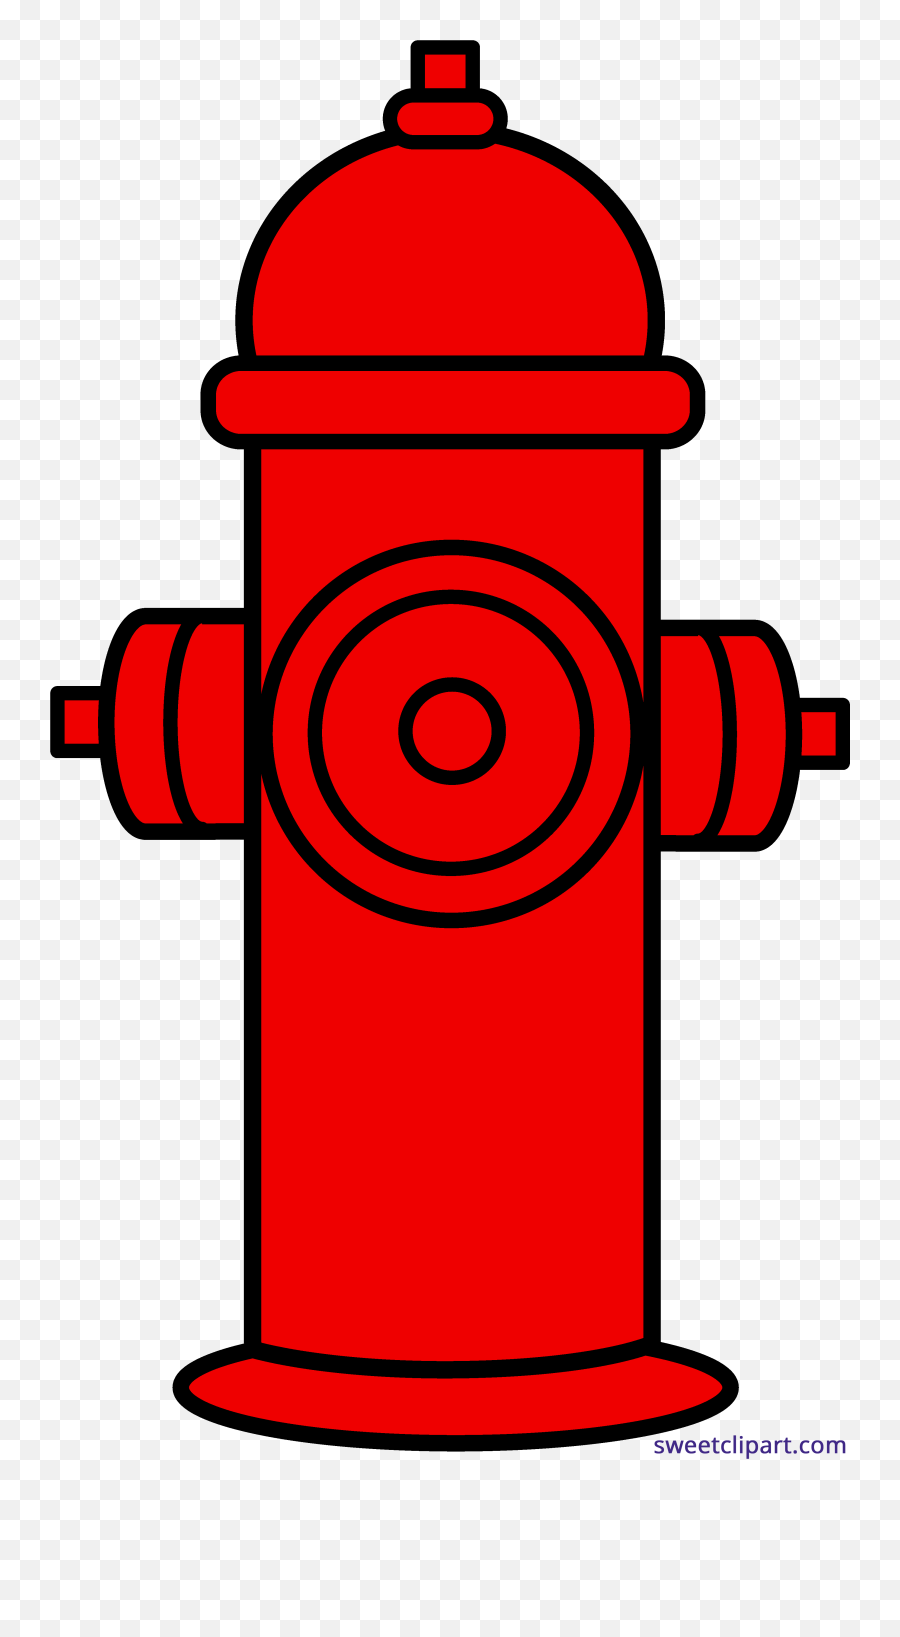 Clipart Fire Hydrant Images - Clipart Fire Hydrant Png Emoji,Giggling Emoji